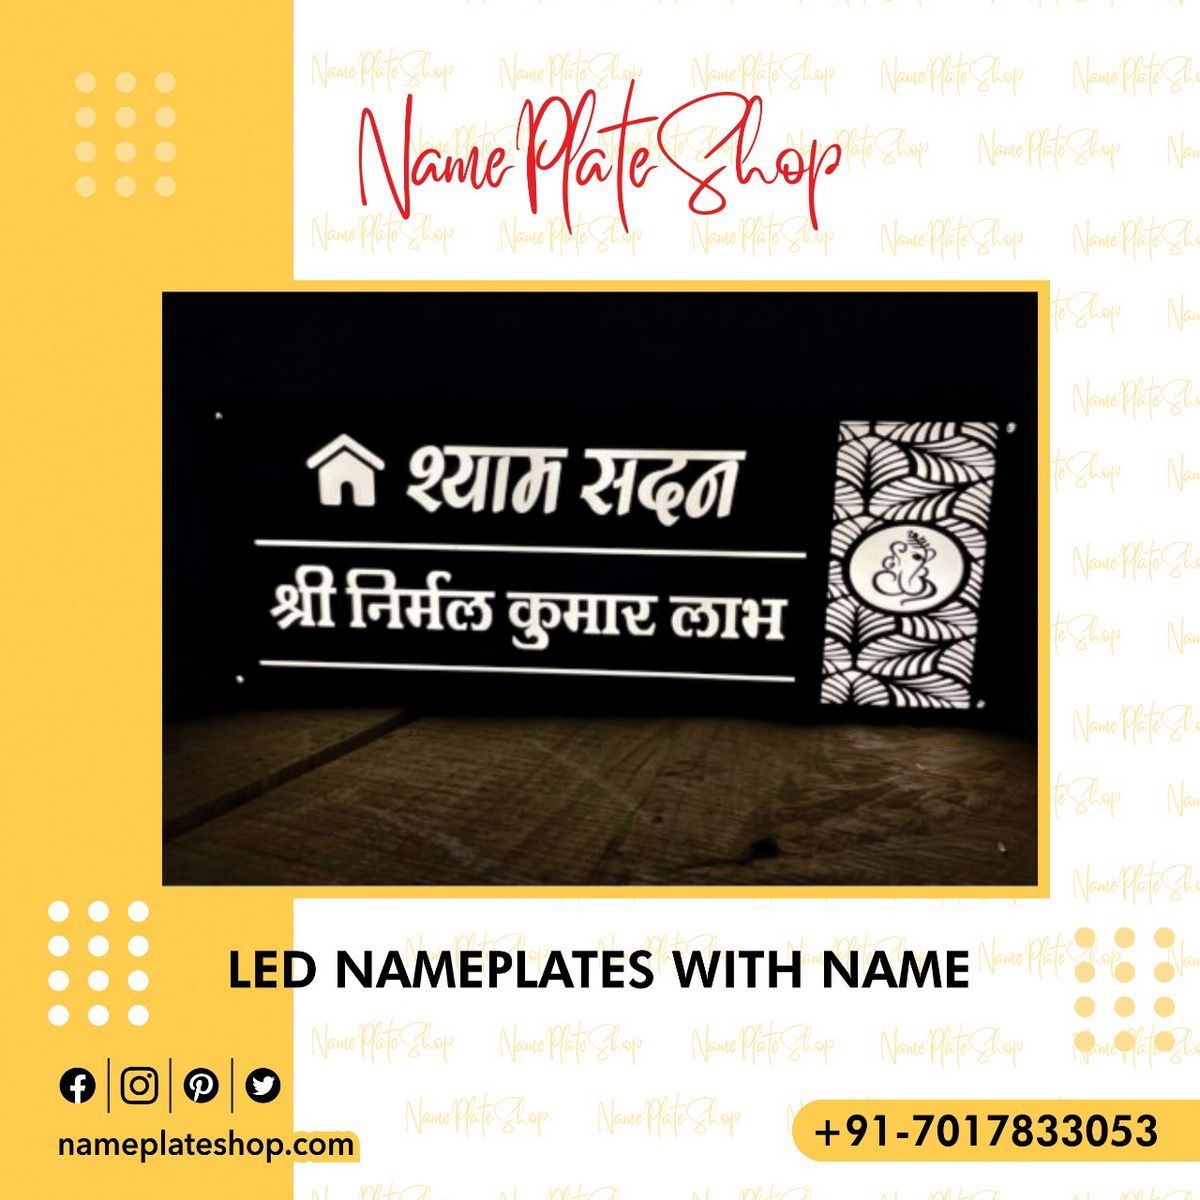 Led Name Plate With Name From Nameplateshop